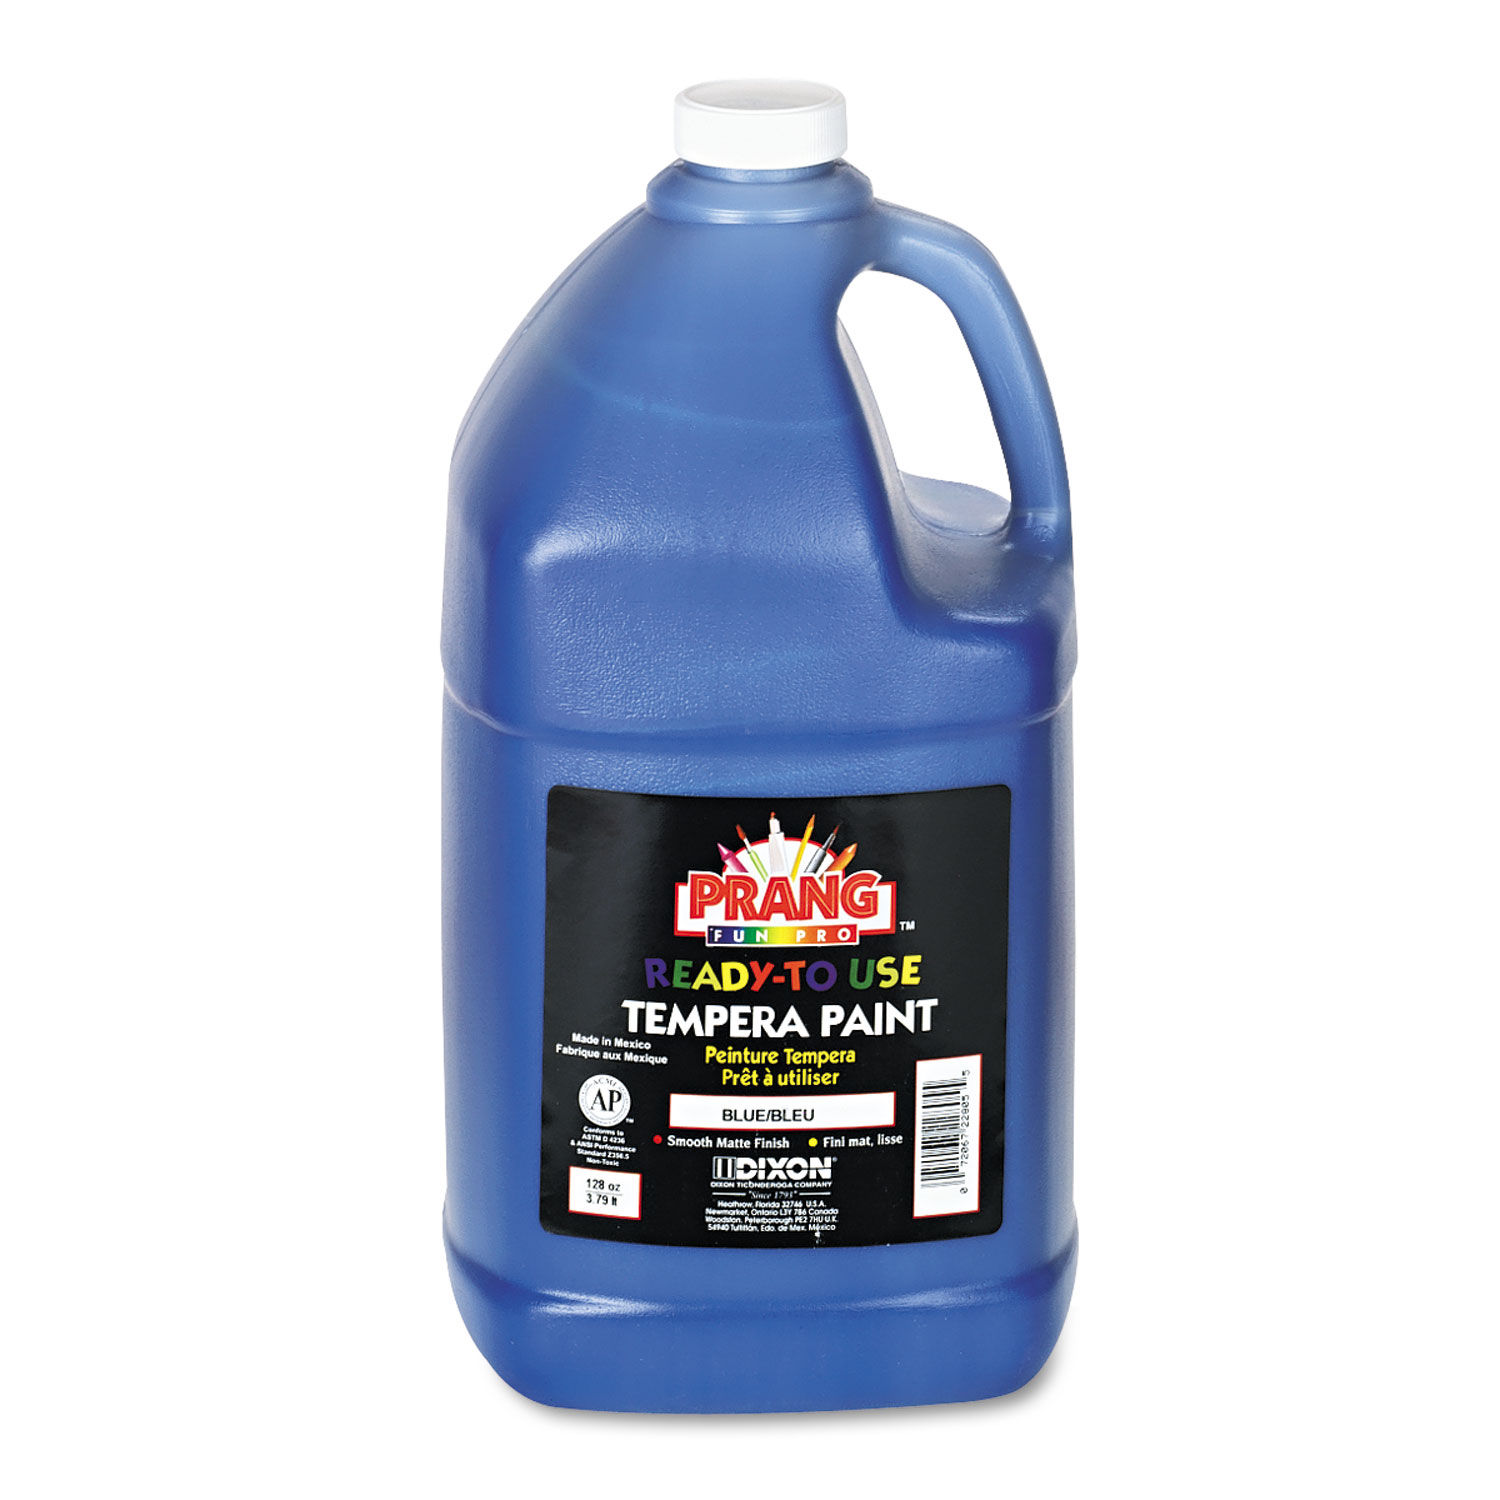 Ready-to-Use Tempera Paint Blue, 1 gal Bottle